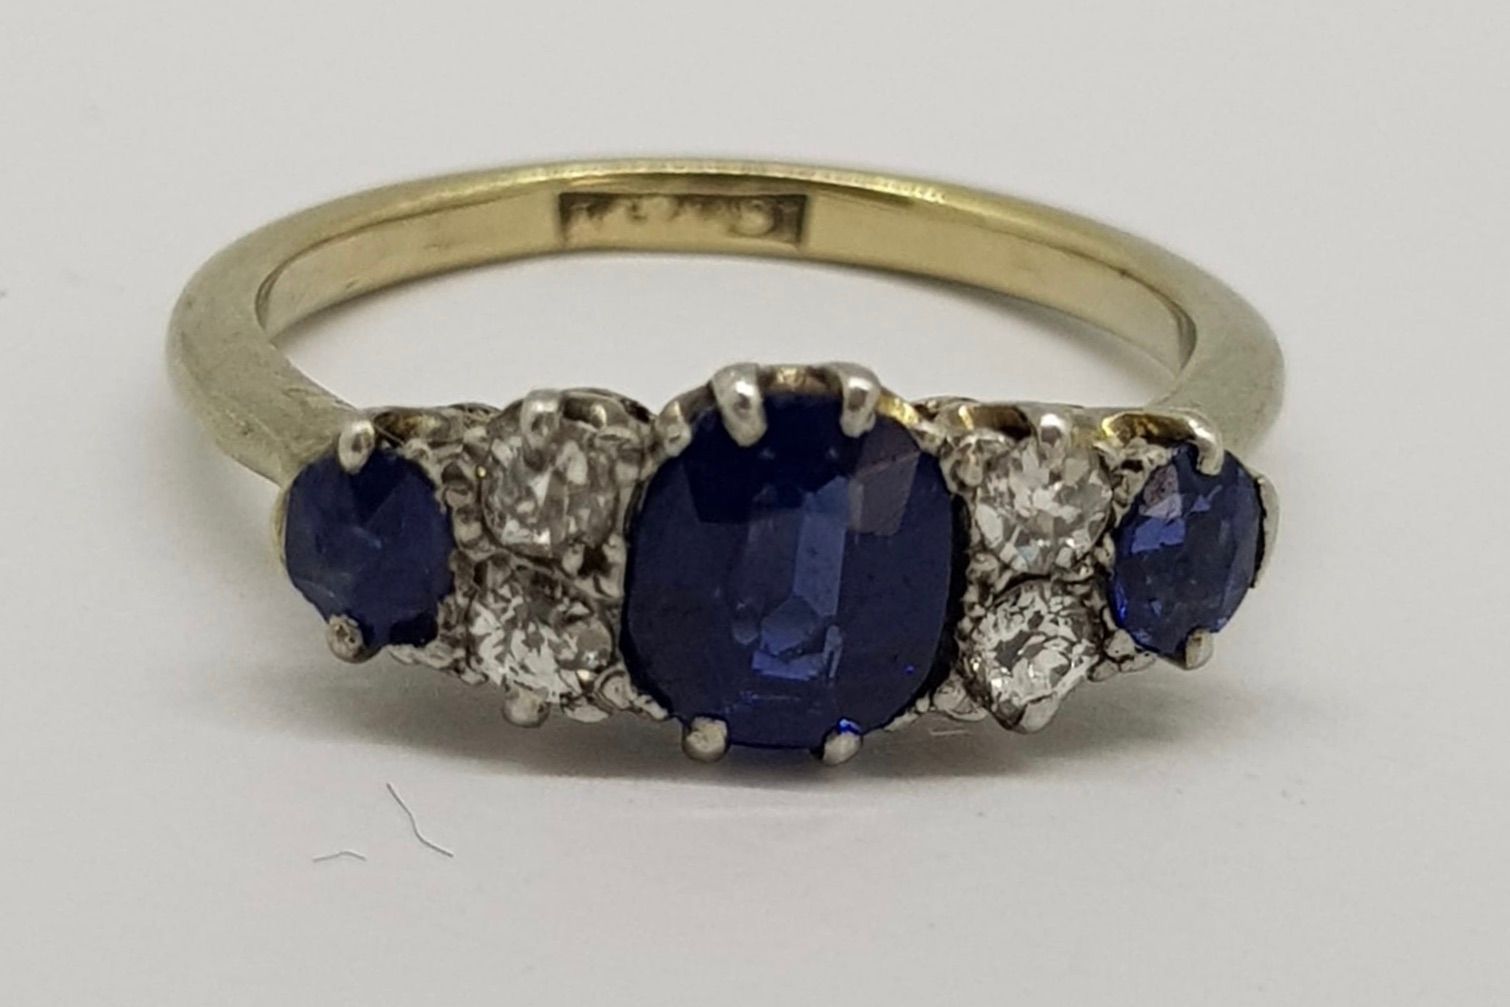 Edwardian Sapphire & Diamond Ring, 3 sapphires with 4 old cut diamonds between, stamped 18ct gold